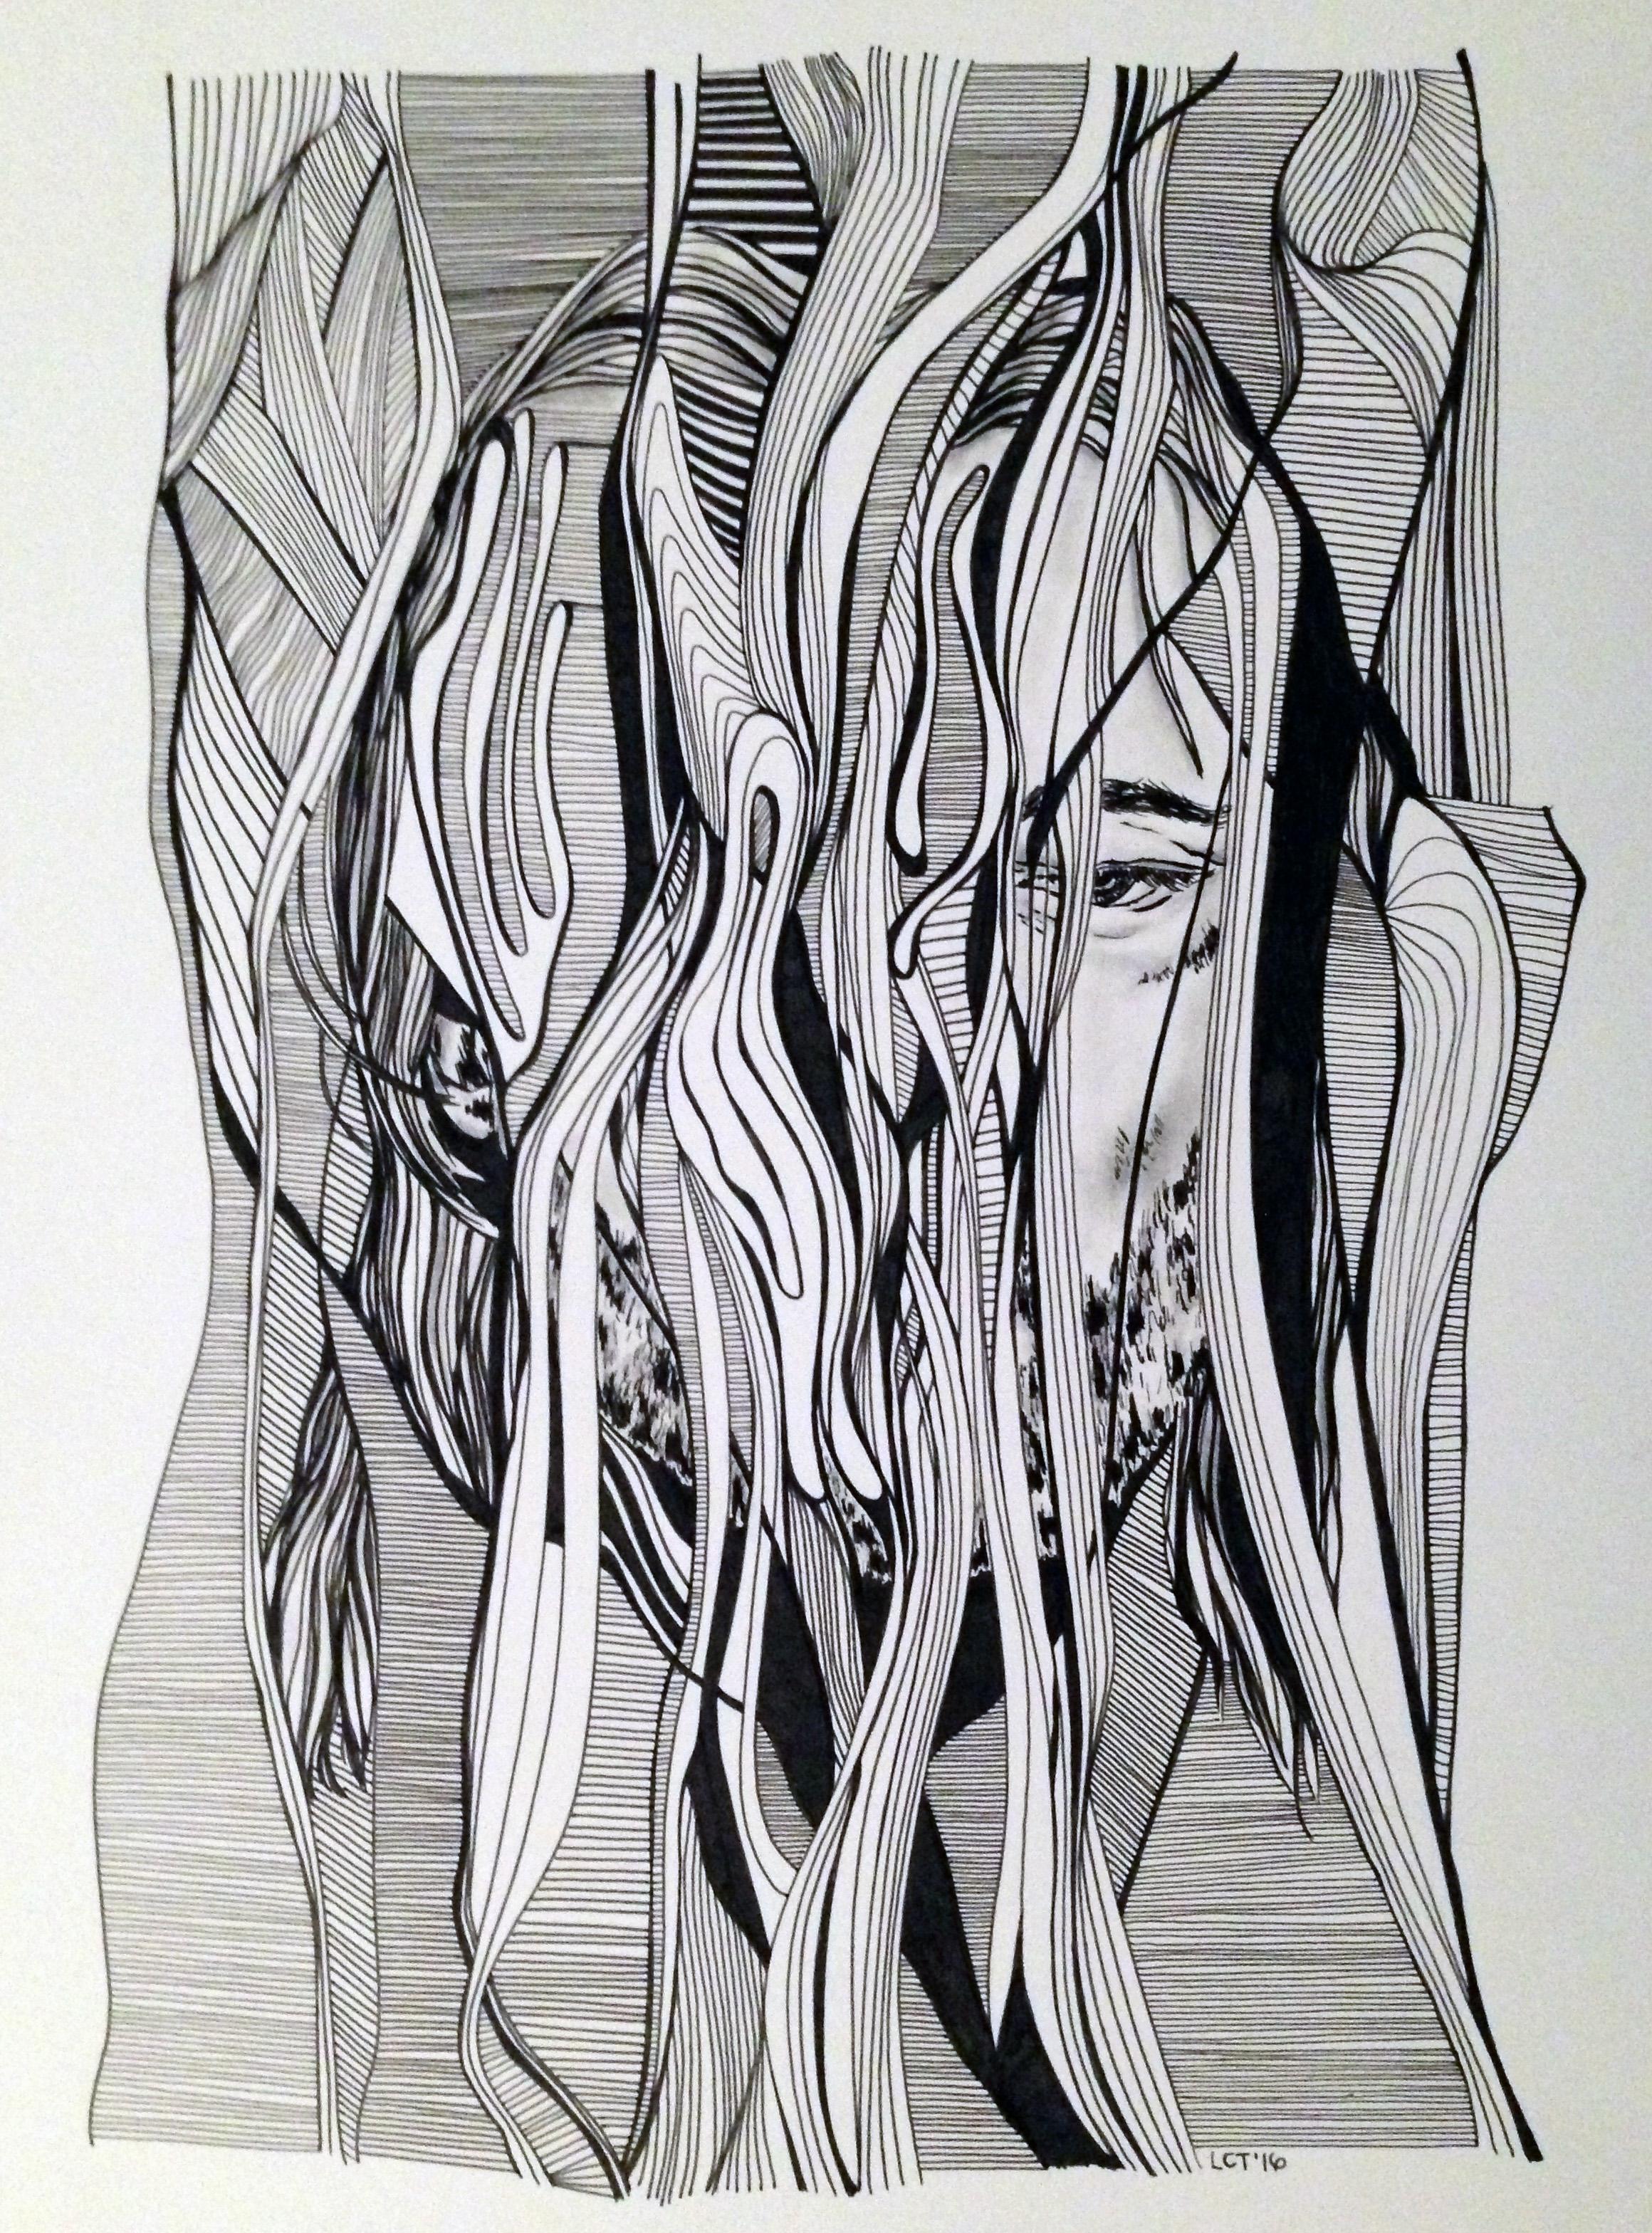 Random Line Drawing at Explore collection of